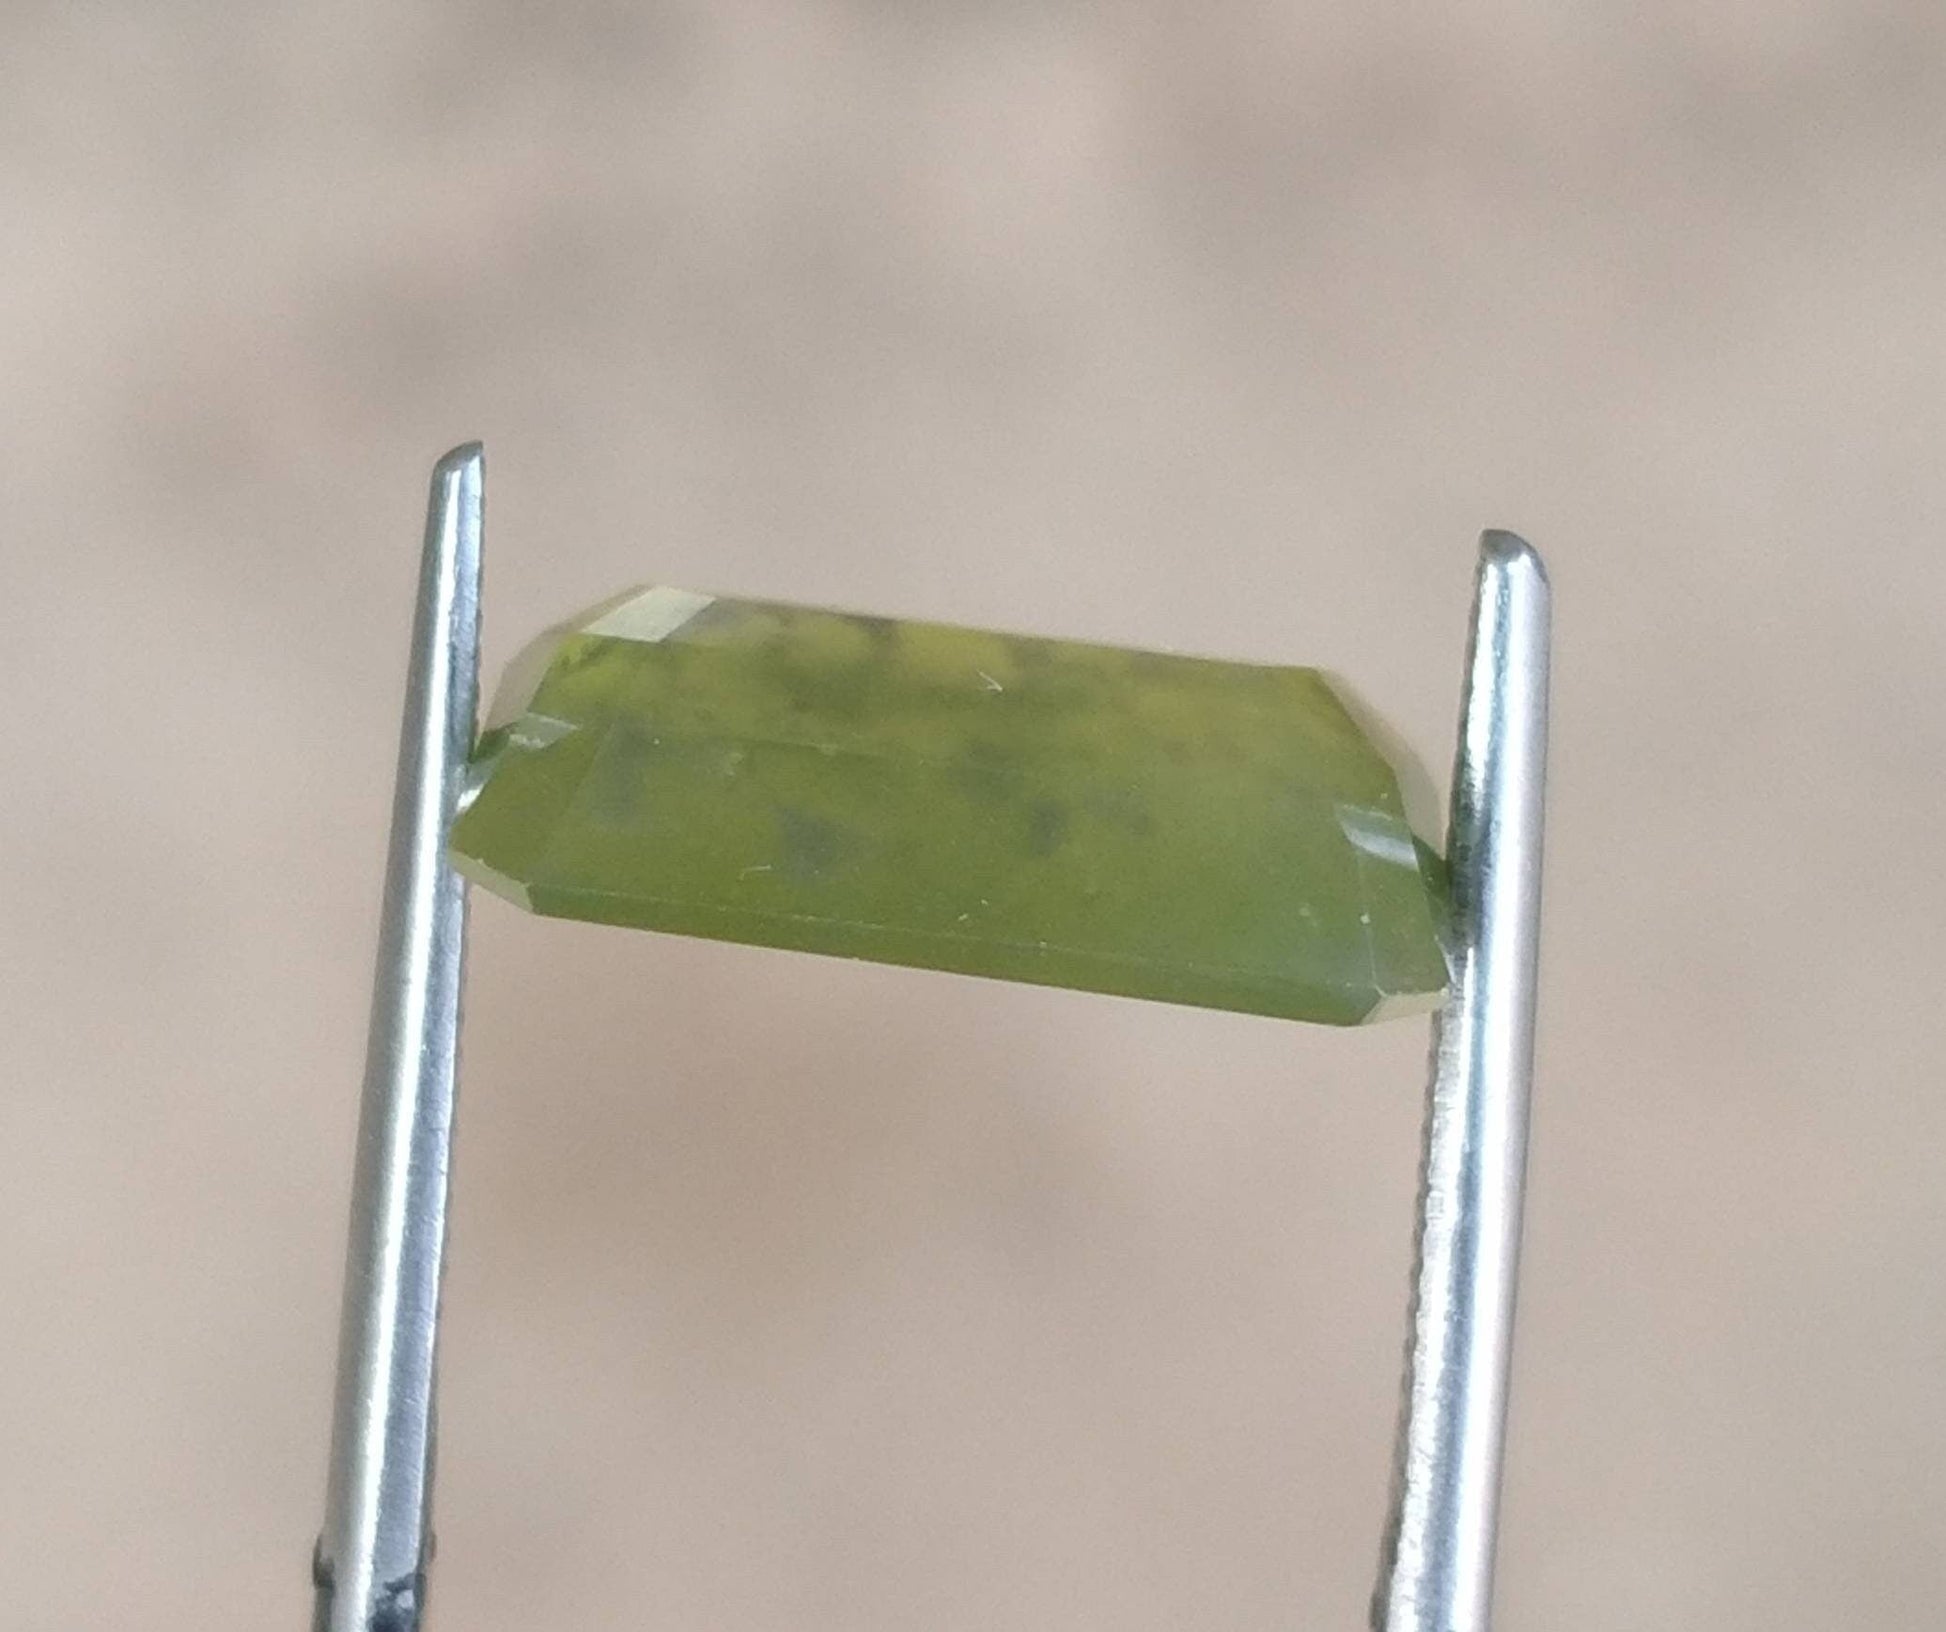 ARSAA GEMS AND MINERALSNatural fine quality beautiful 5 carats radiant cut shape faceted green hydrograssular garnet gem - Premium  from ARSAA GEMS AND MINERALS - Just $10.00! Shop now at ARSAA GEMS AND MINERALS